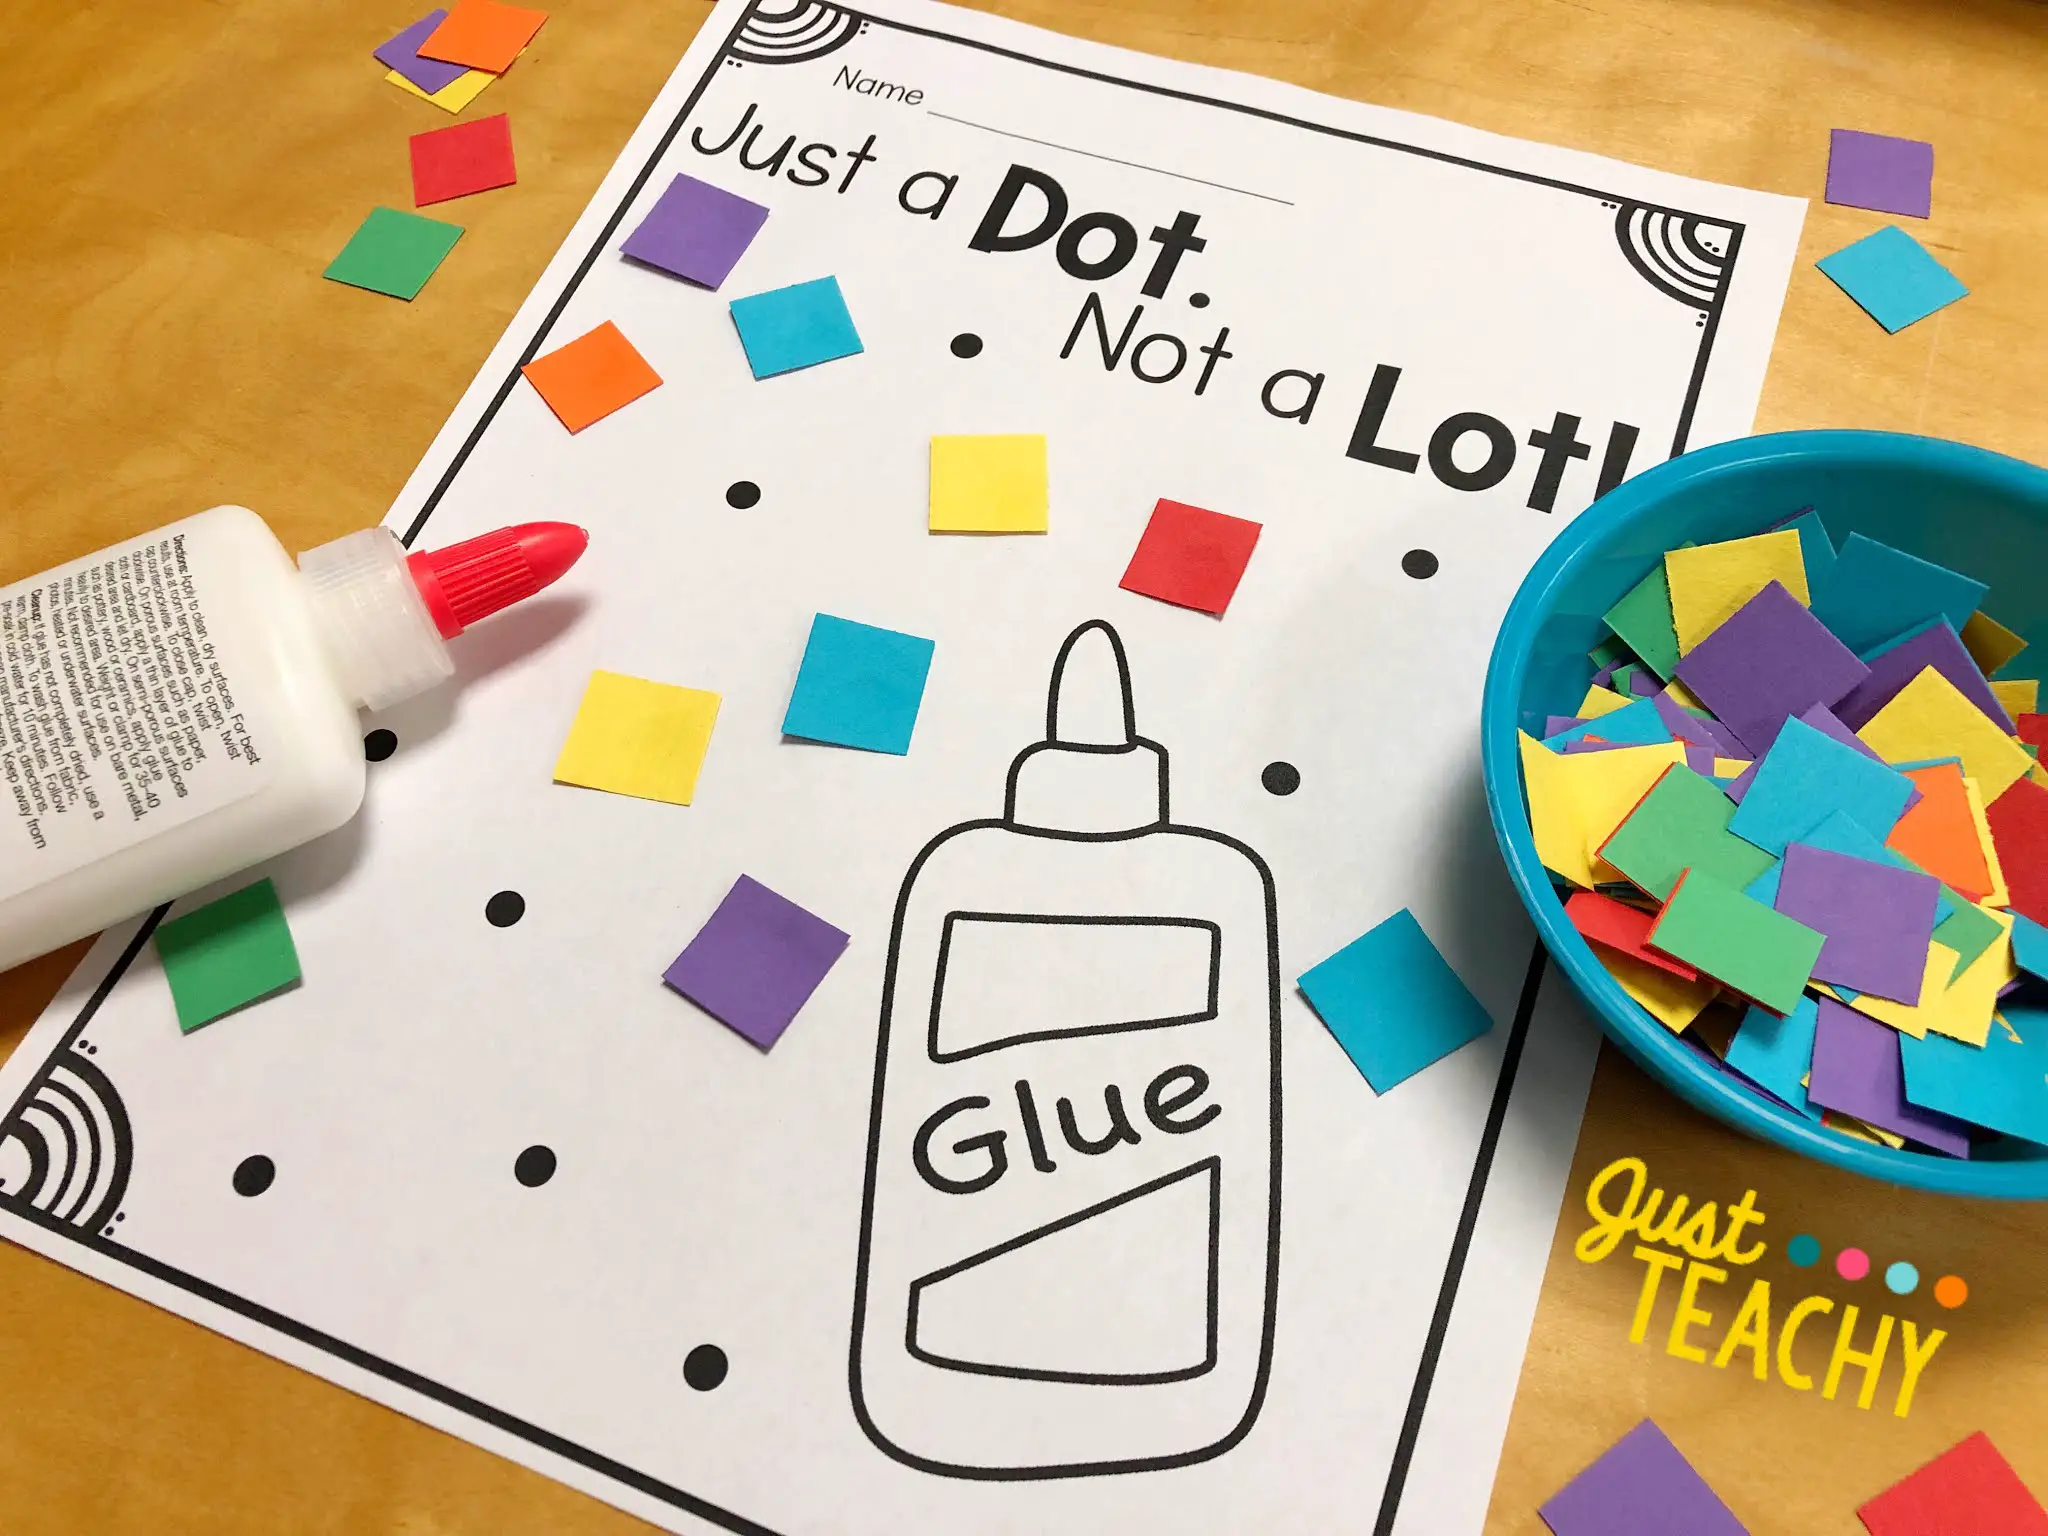 How To Use Glue